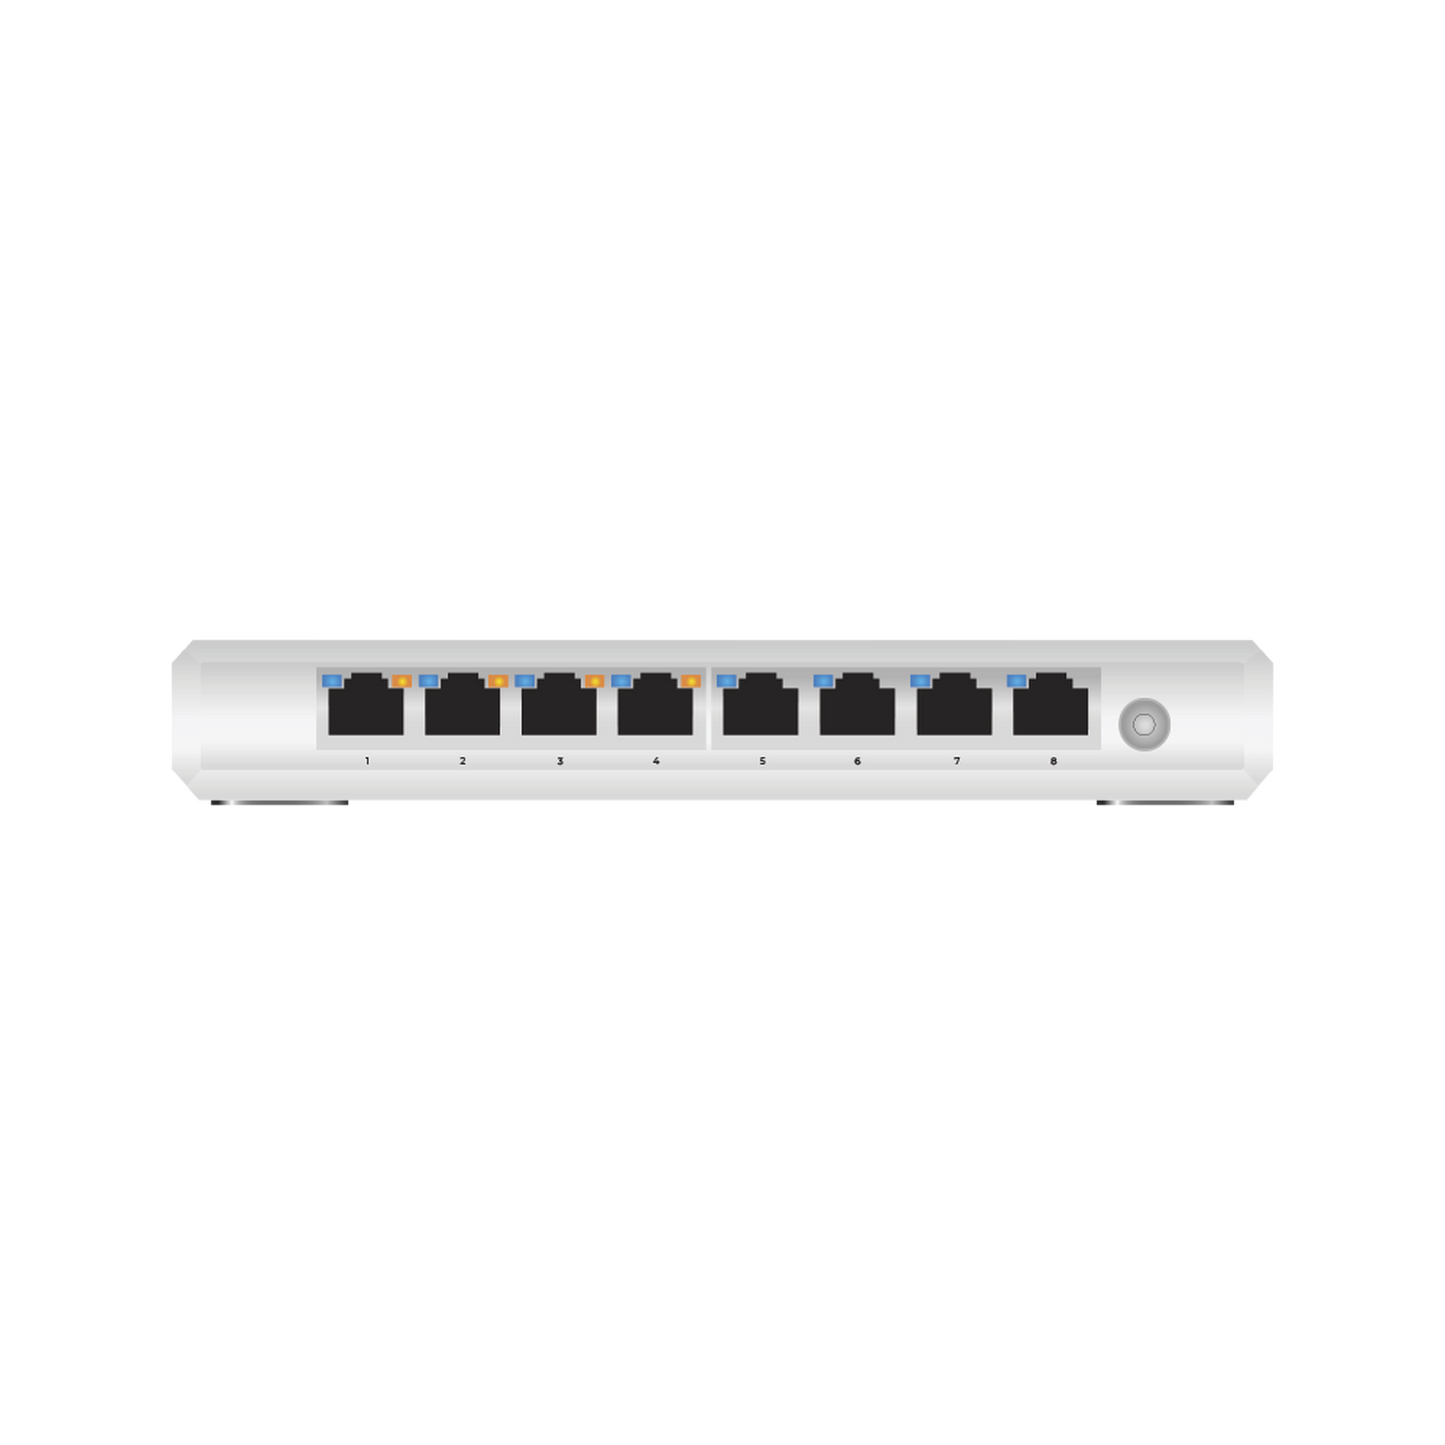 Managed Gigabit PoE+ Switch / 8 ports 10/100/1000 Mbps / Up to 60W / Alta Labs Cloud.